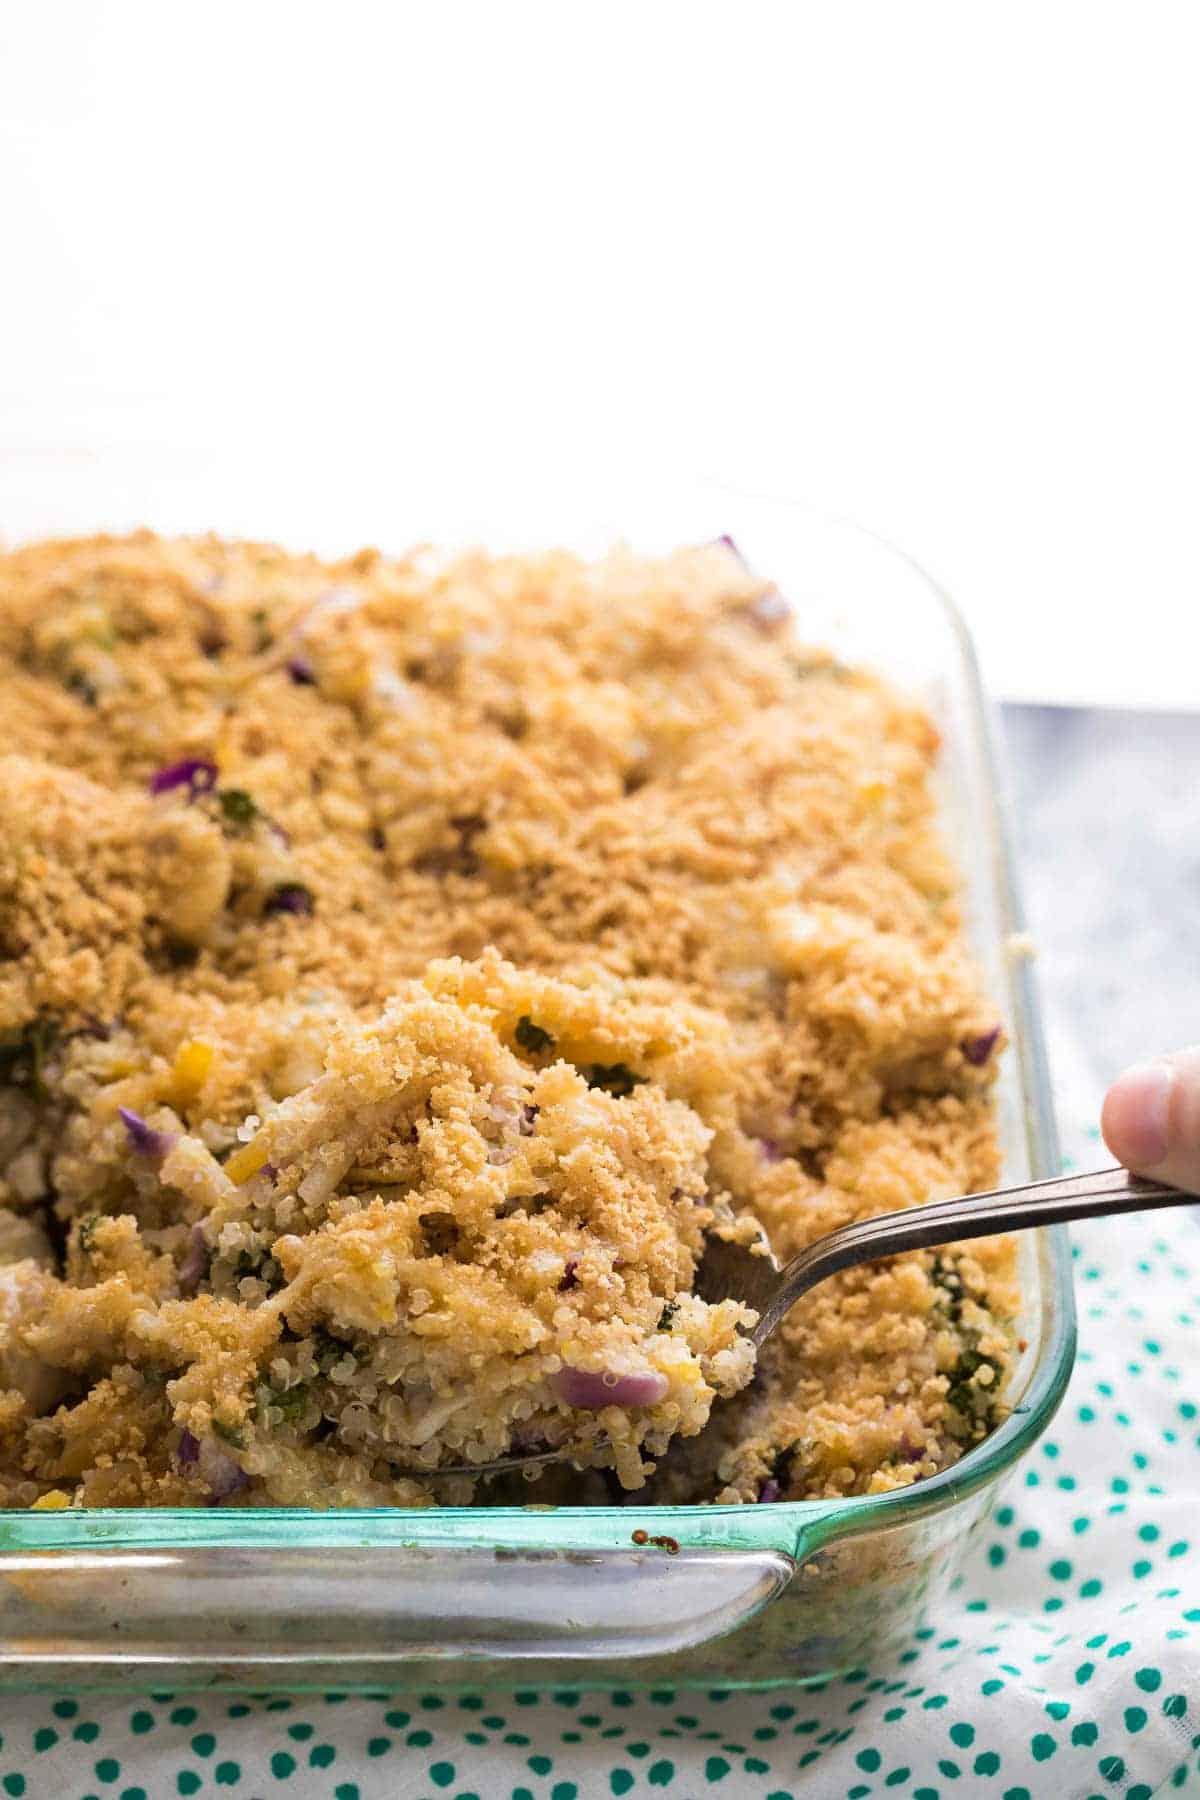 Chicken Quinoa Casserole with a spoon in the glass casserole dish after baking